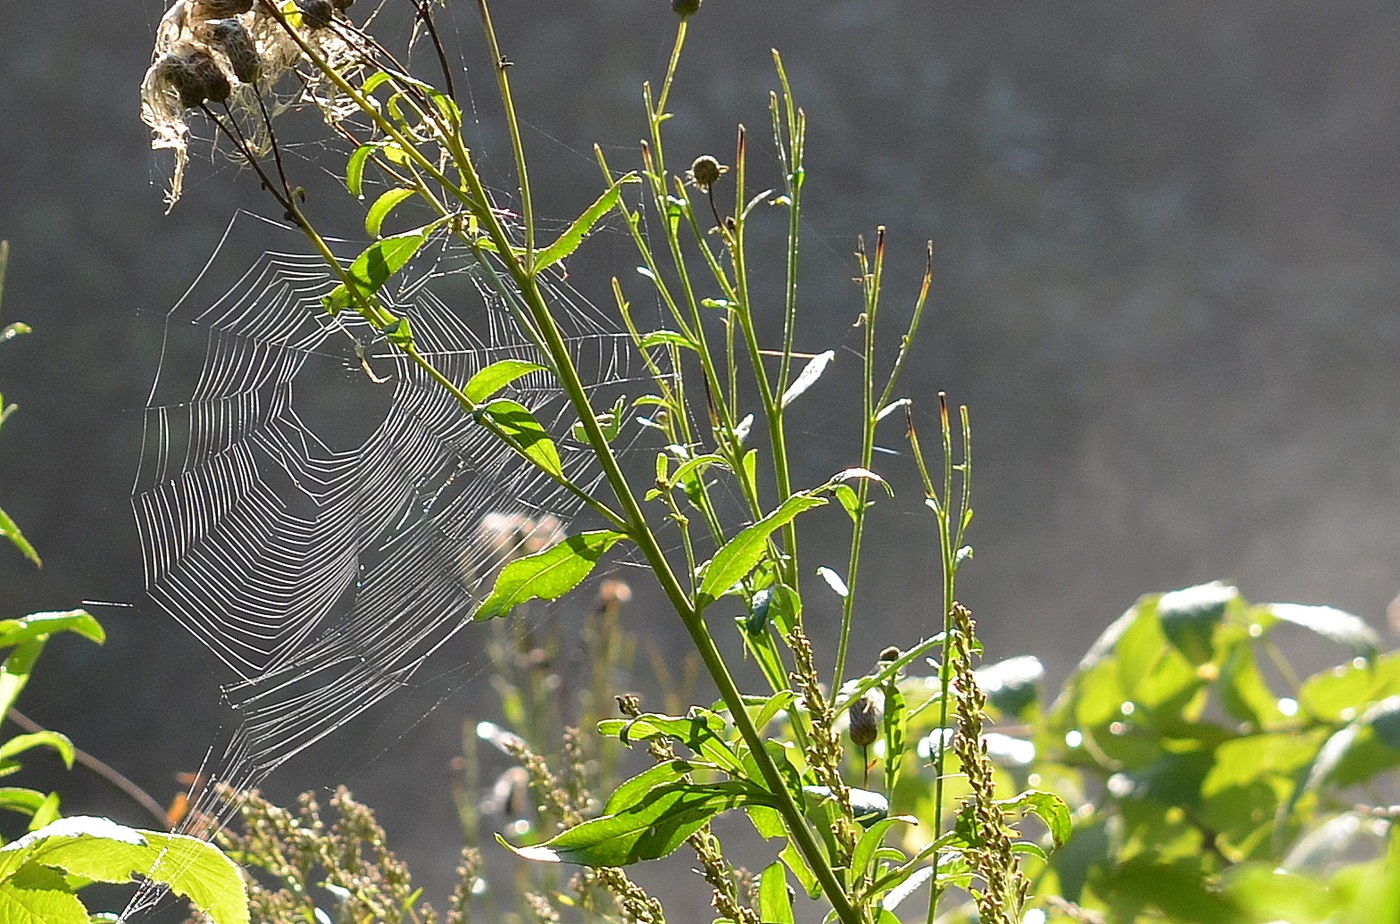 Photos of cobwebs in the field